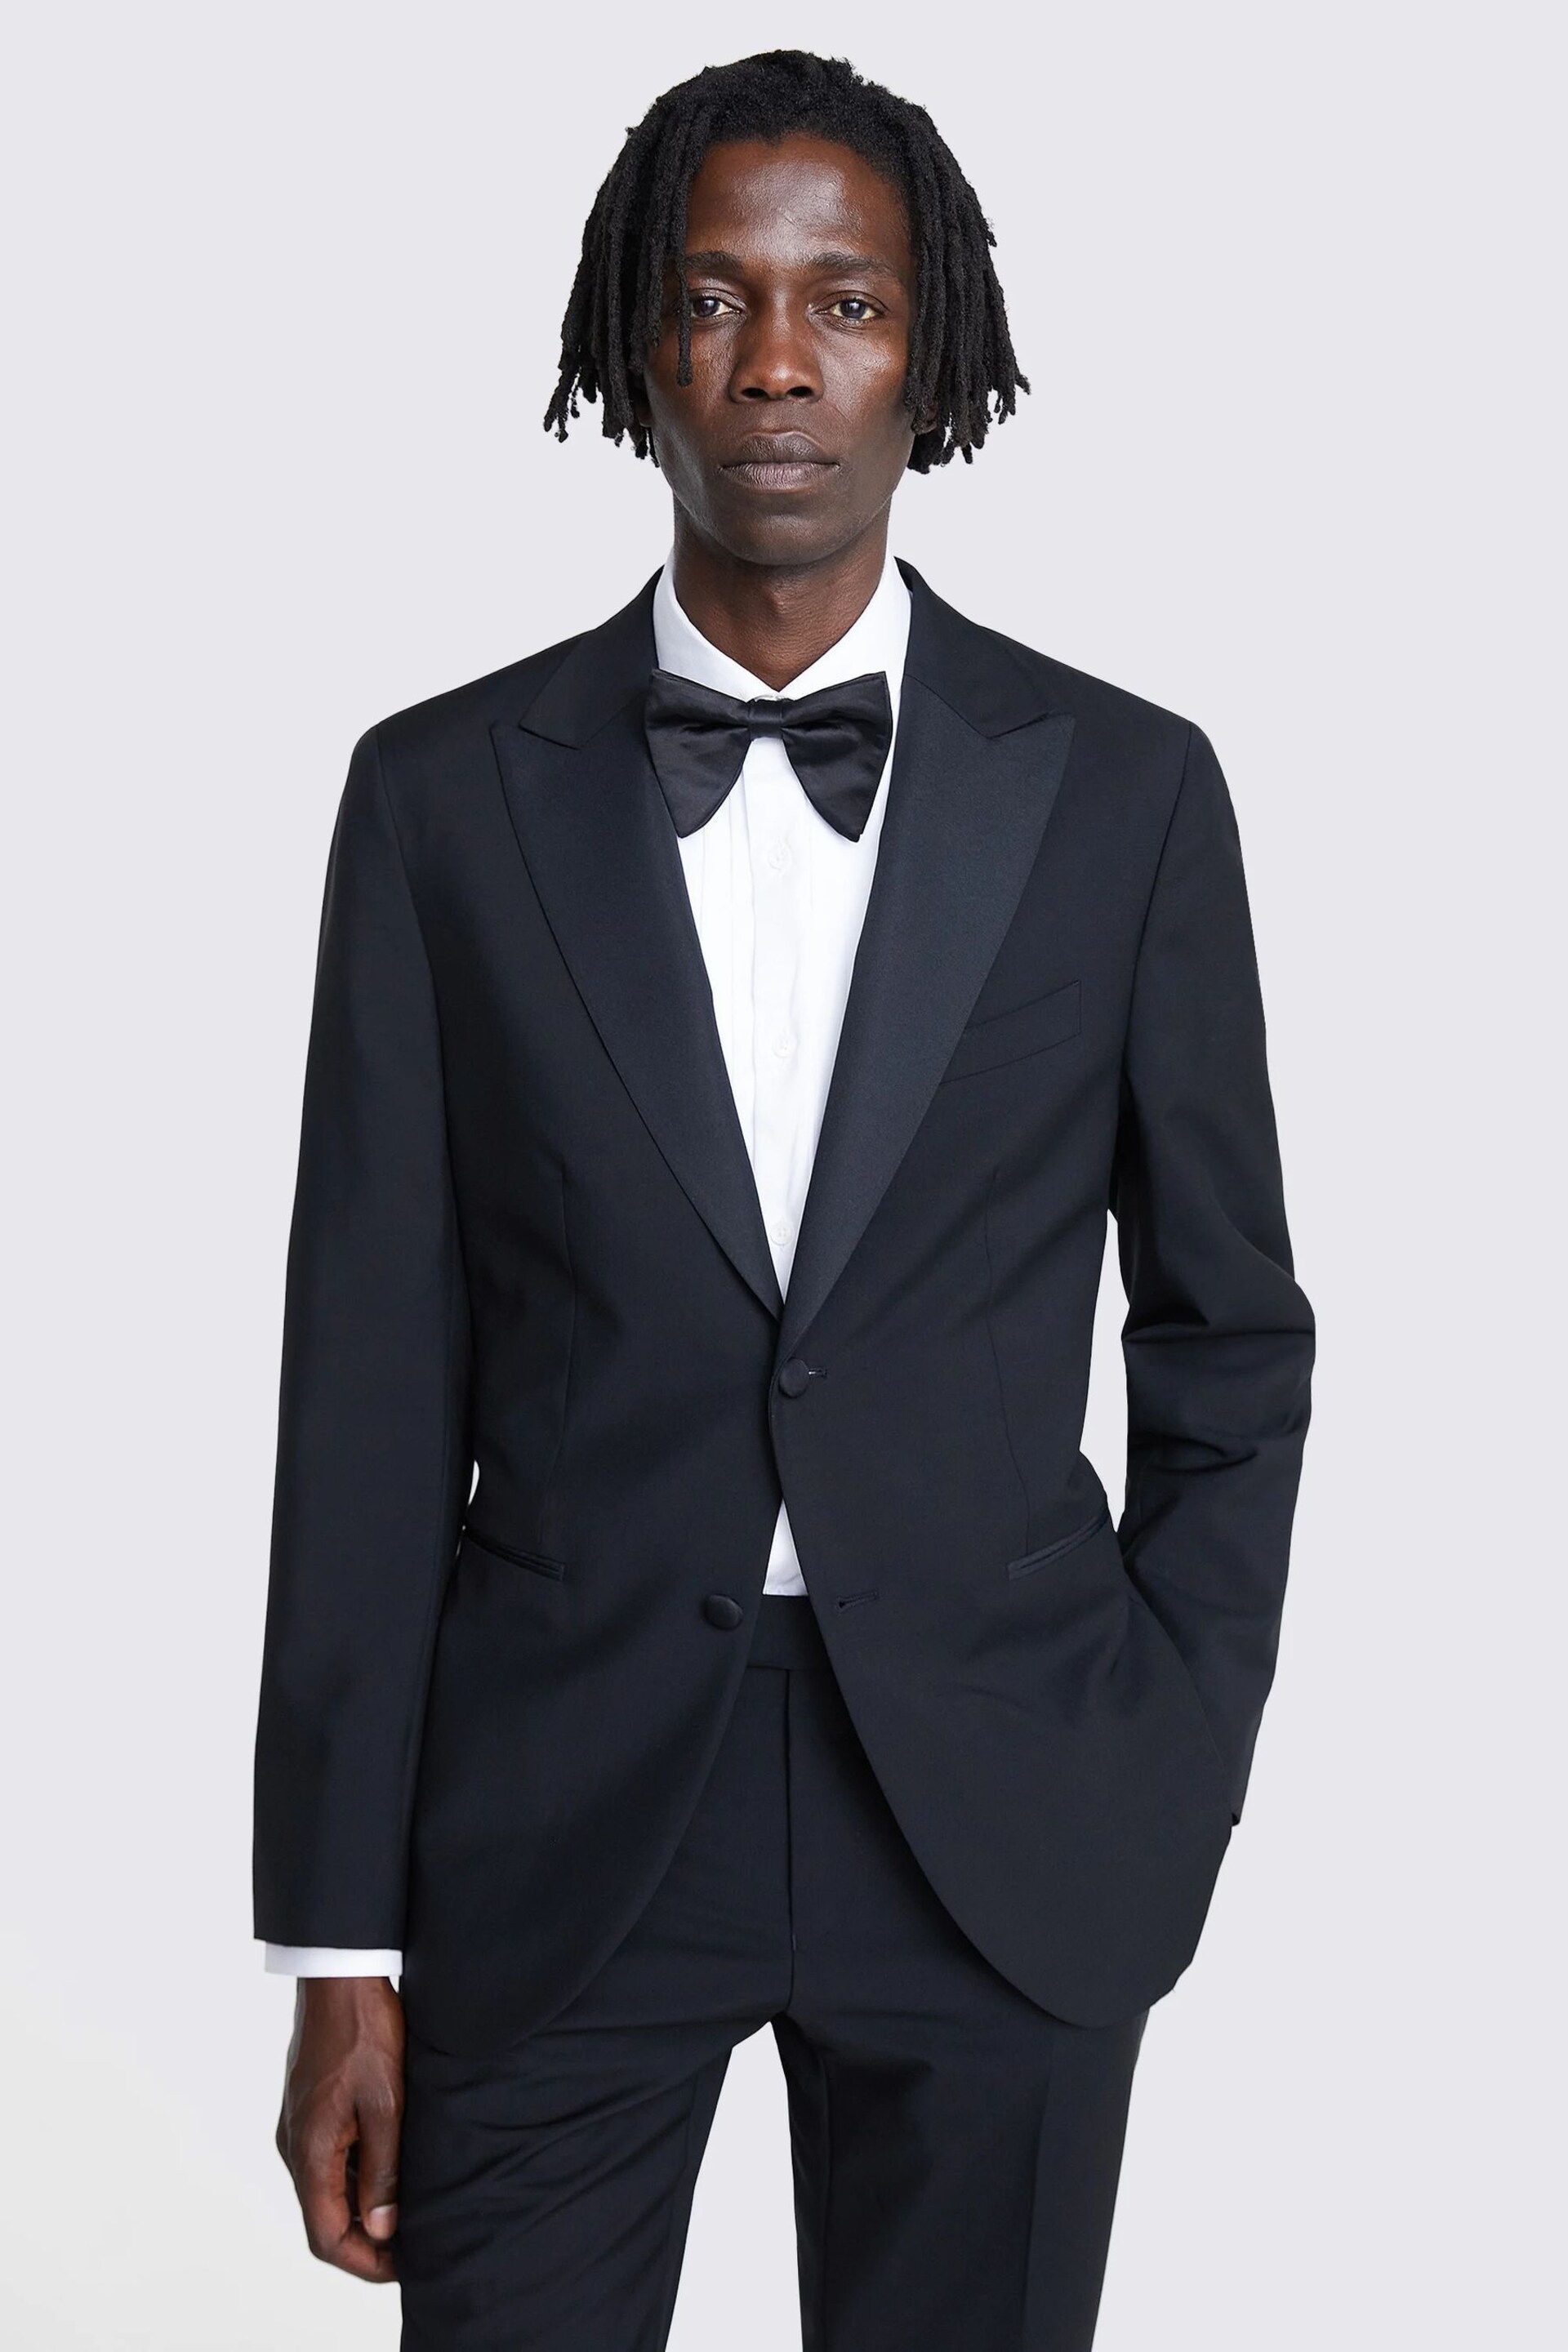 MOSS Black Tailored Fit Dress Jacket - Image 4 of 9